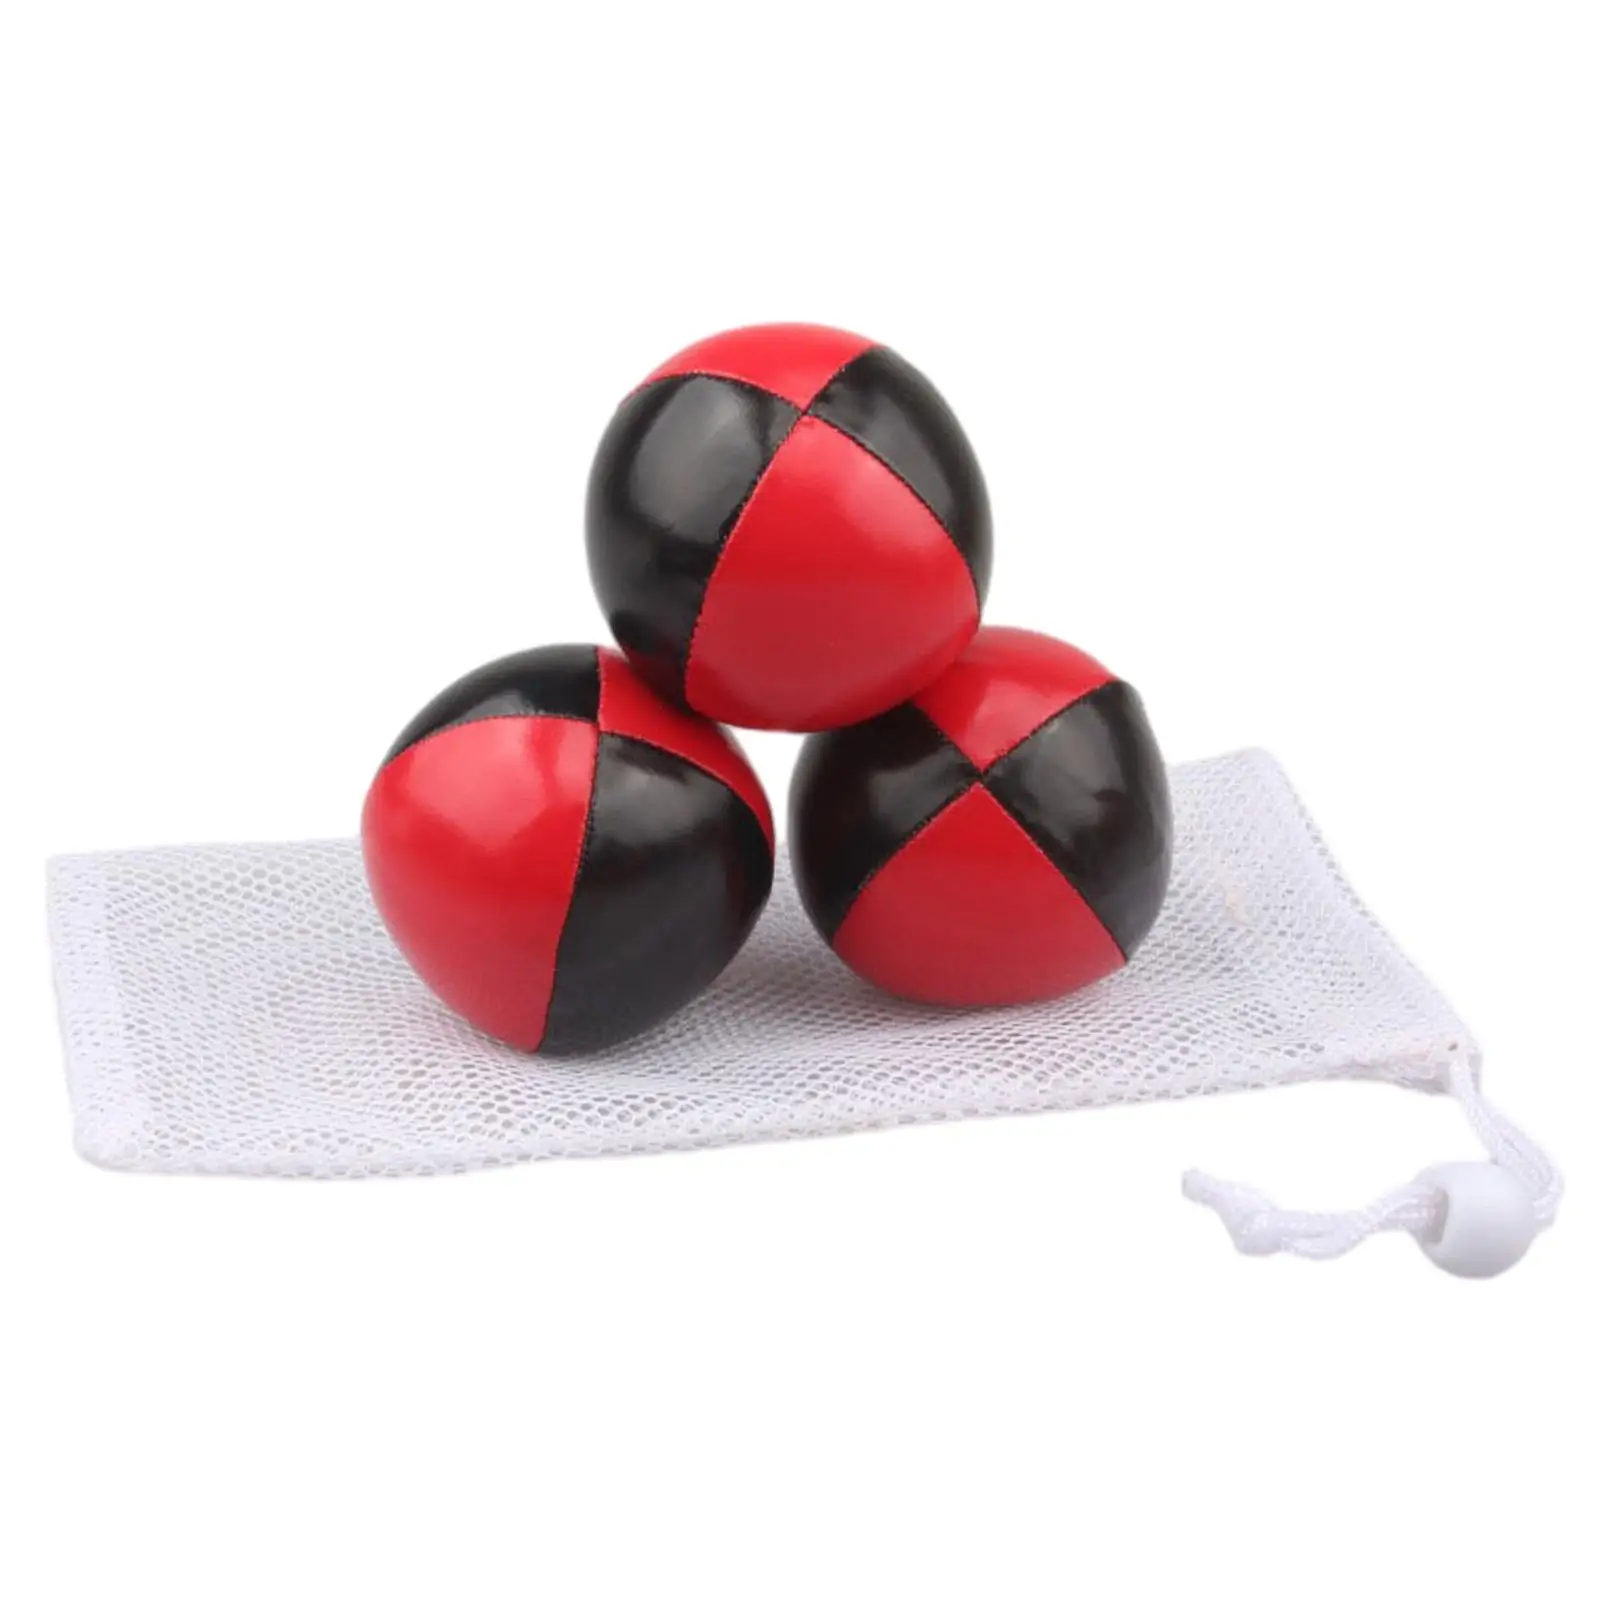 3 Pieces Juggling Balls Set for Beginners Portable Easter Basket Stuffer Soft Hand Throwing Juggling Toy Balls for Park Activity